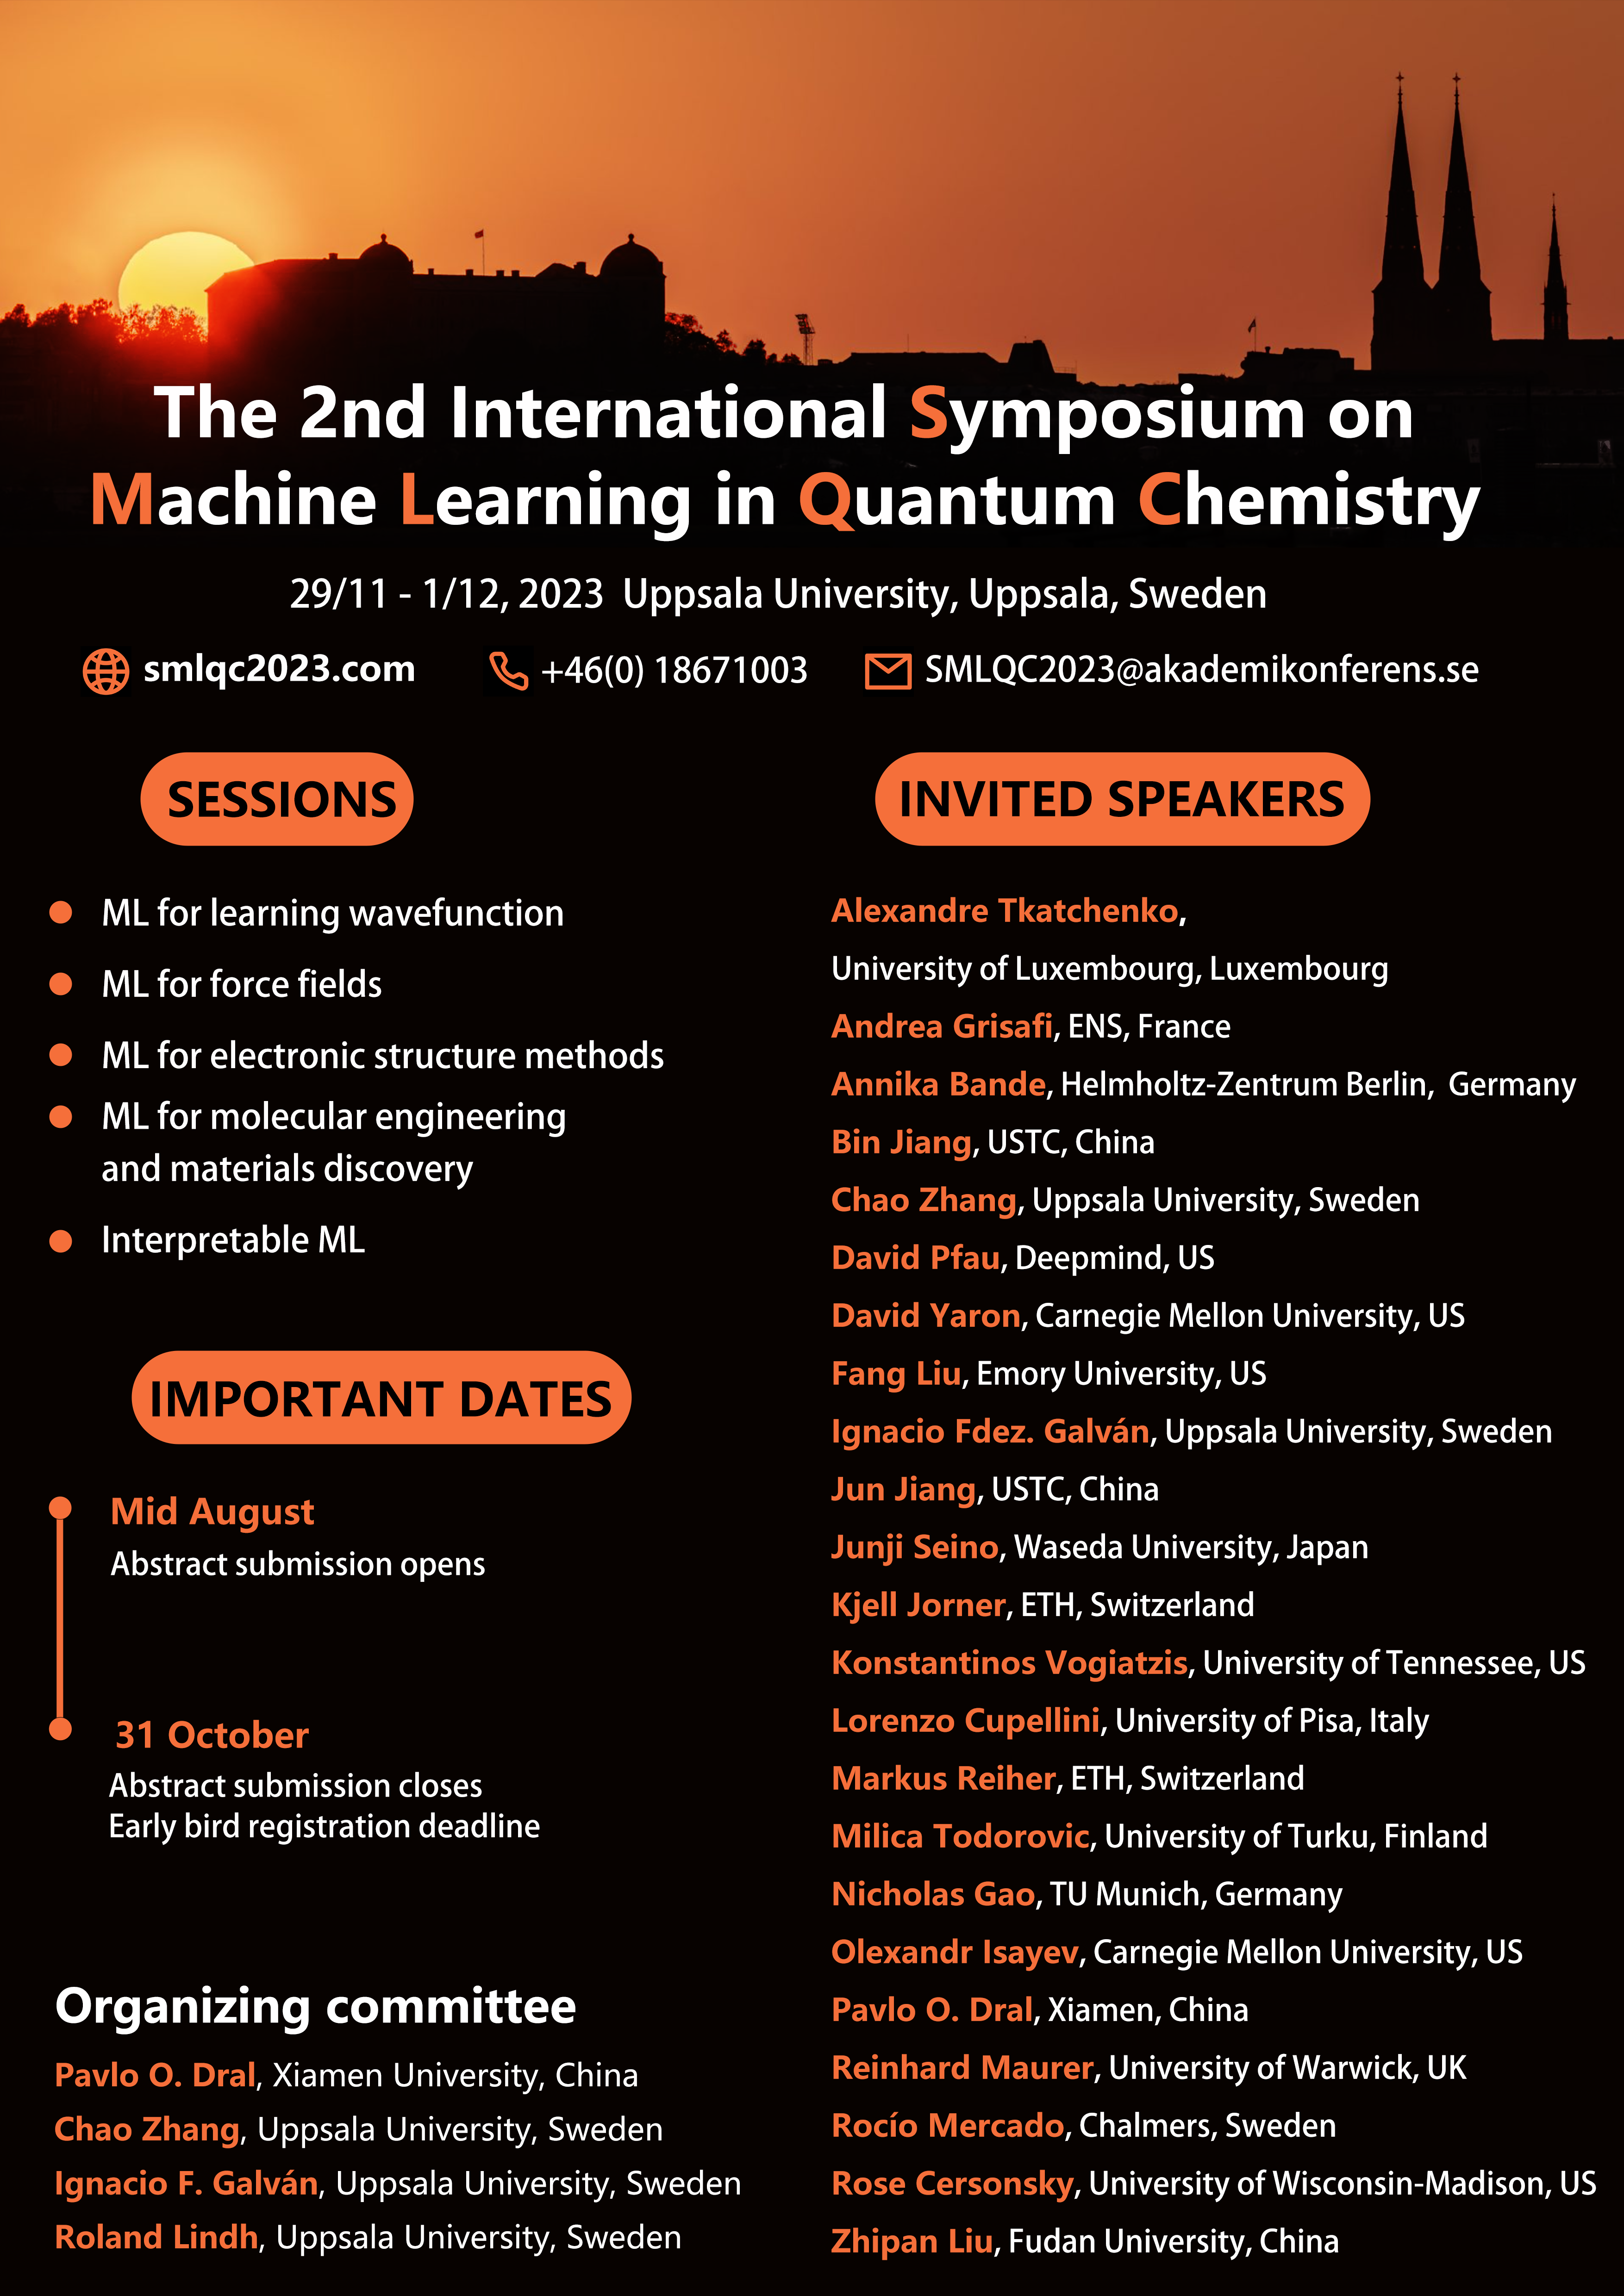 SMLQC 2023: The 2nd International Symposium on Machine Learning in Quantum Chemistry